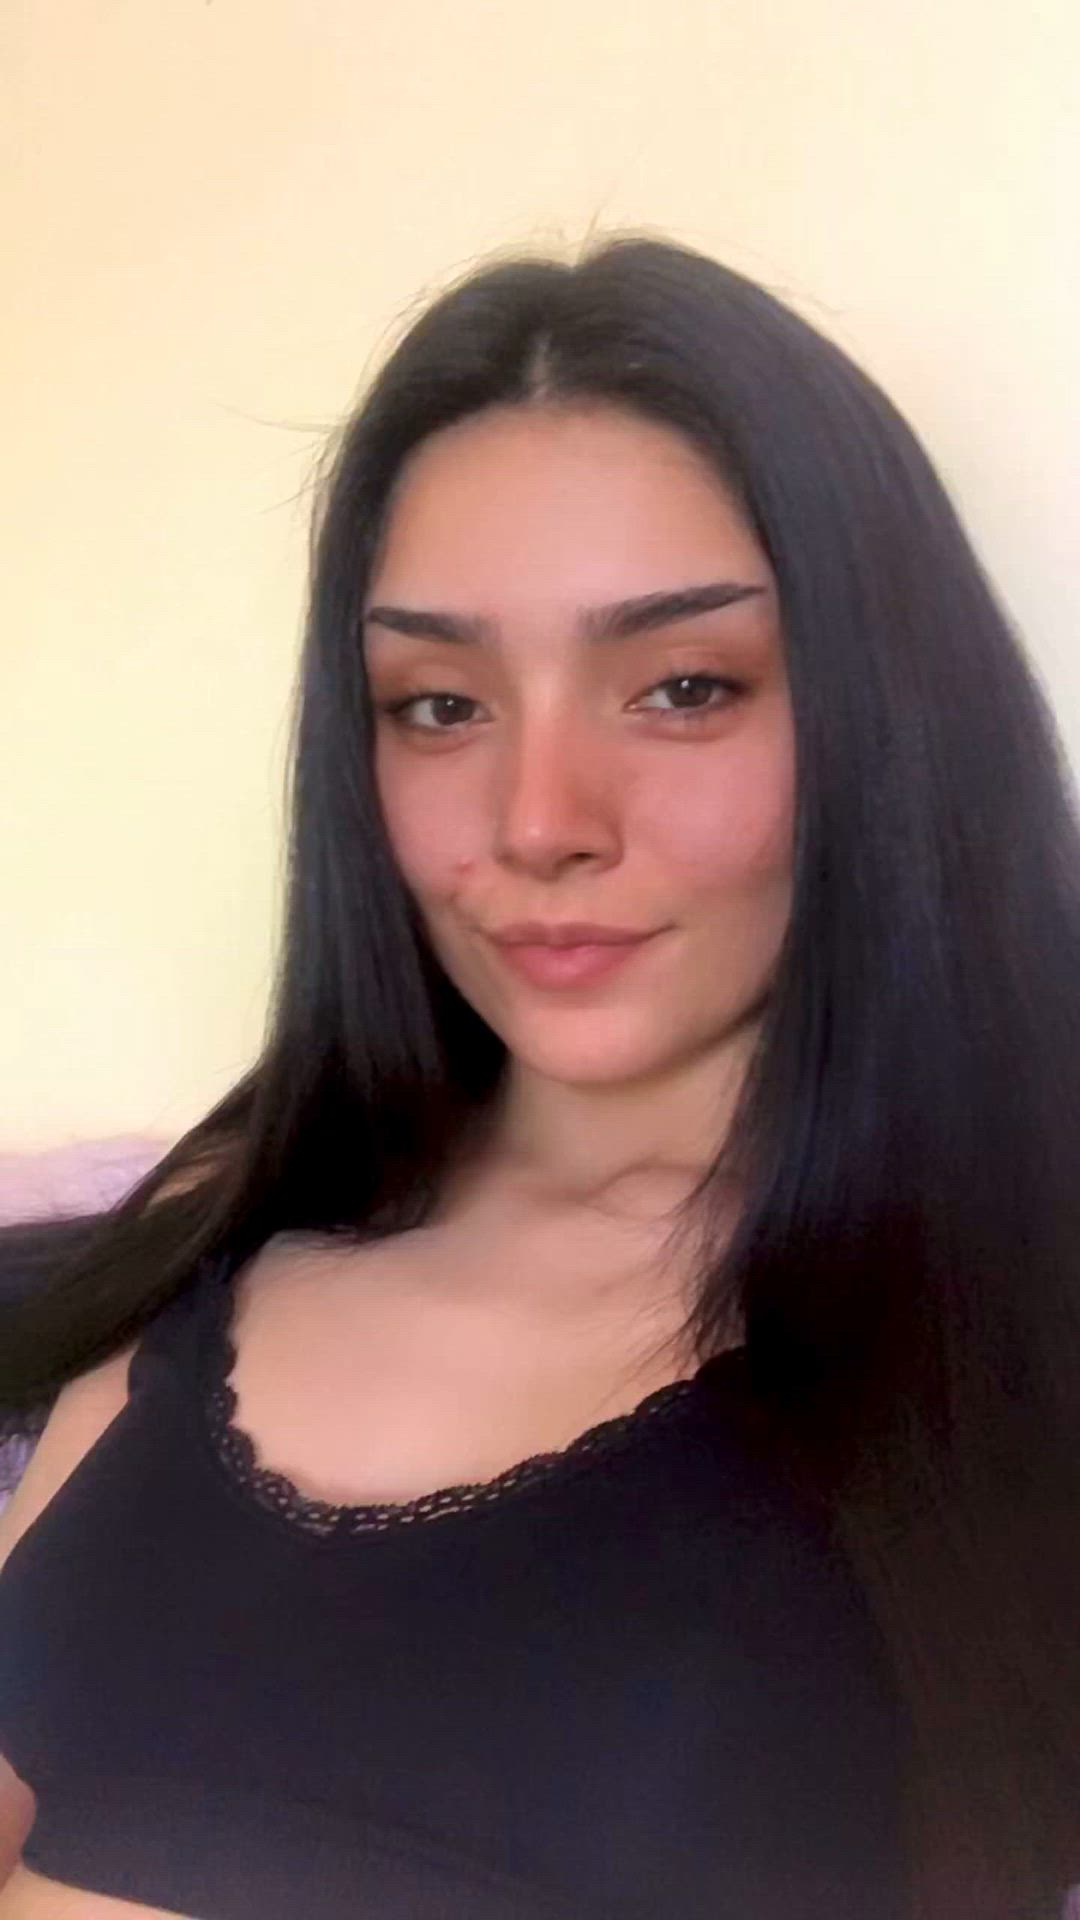 Teen porn video with onlyfans model isabellaflorees <strong>@isabella_flores98</strong>